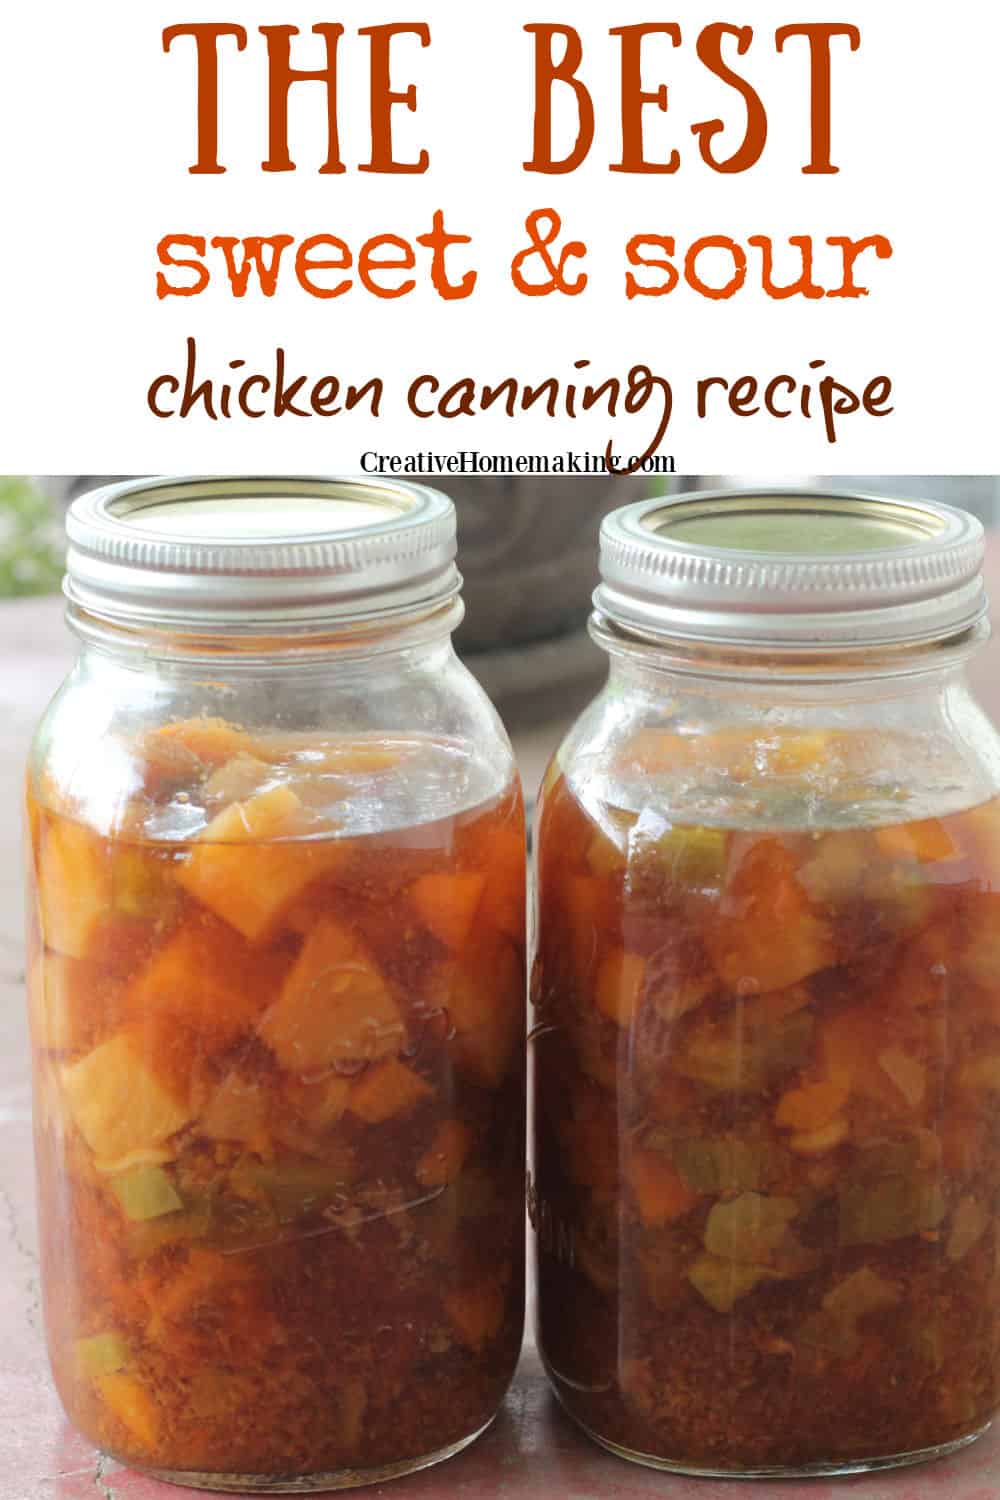 Canning Sweet and Sour Chicken - Creative Homemaking